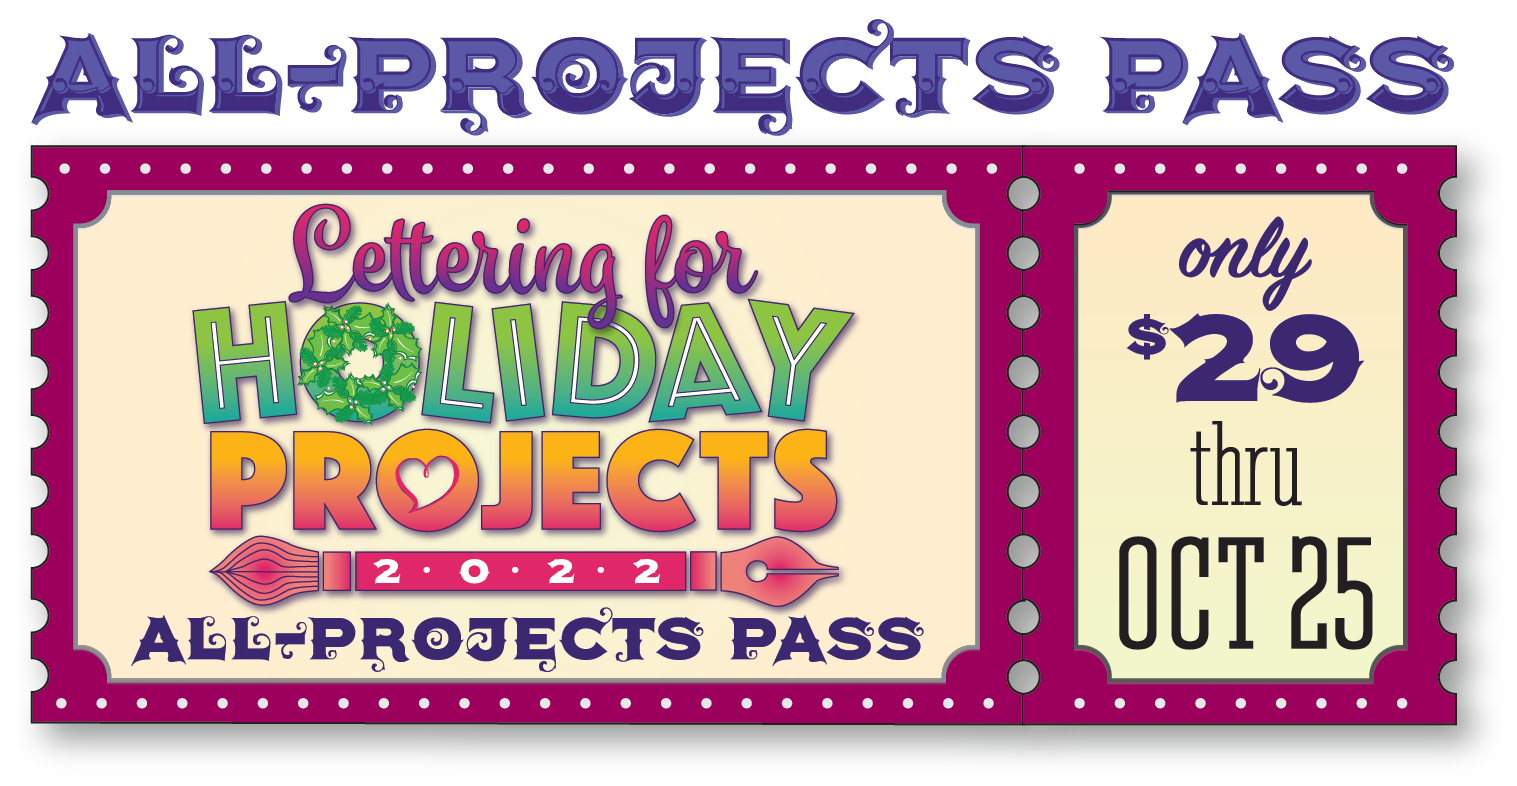 All Projects Pass